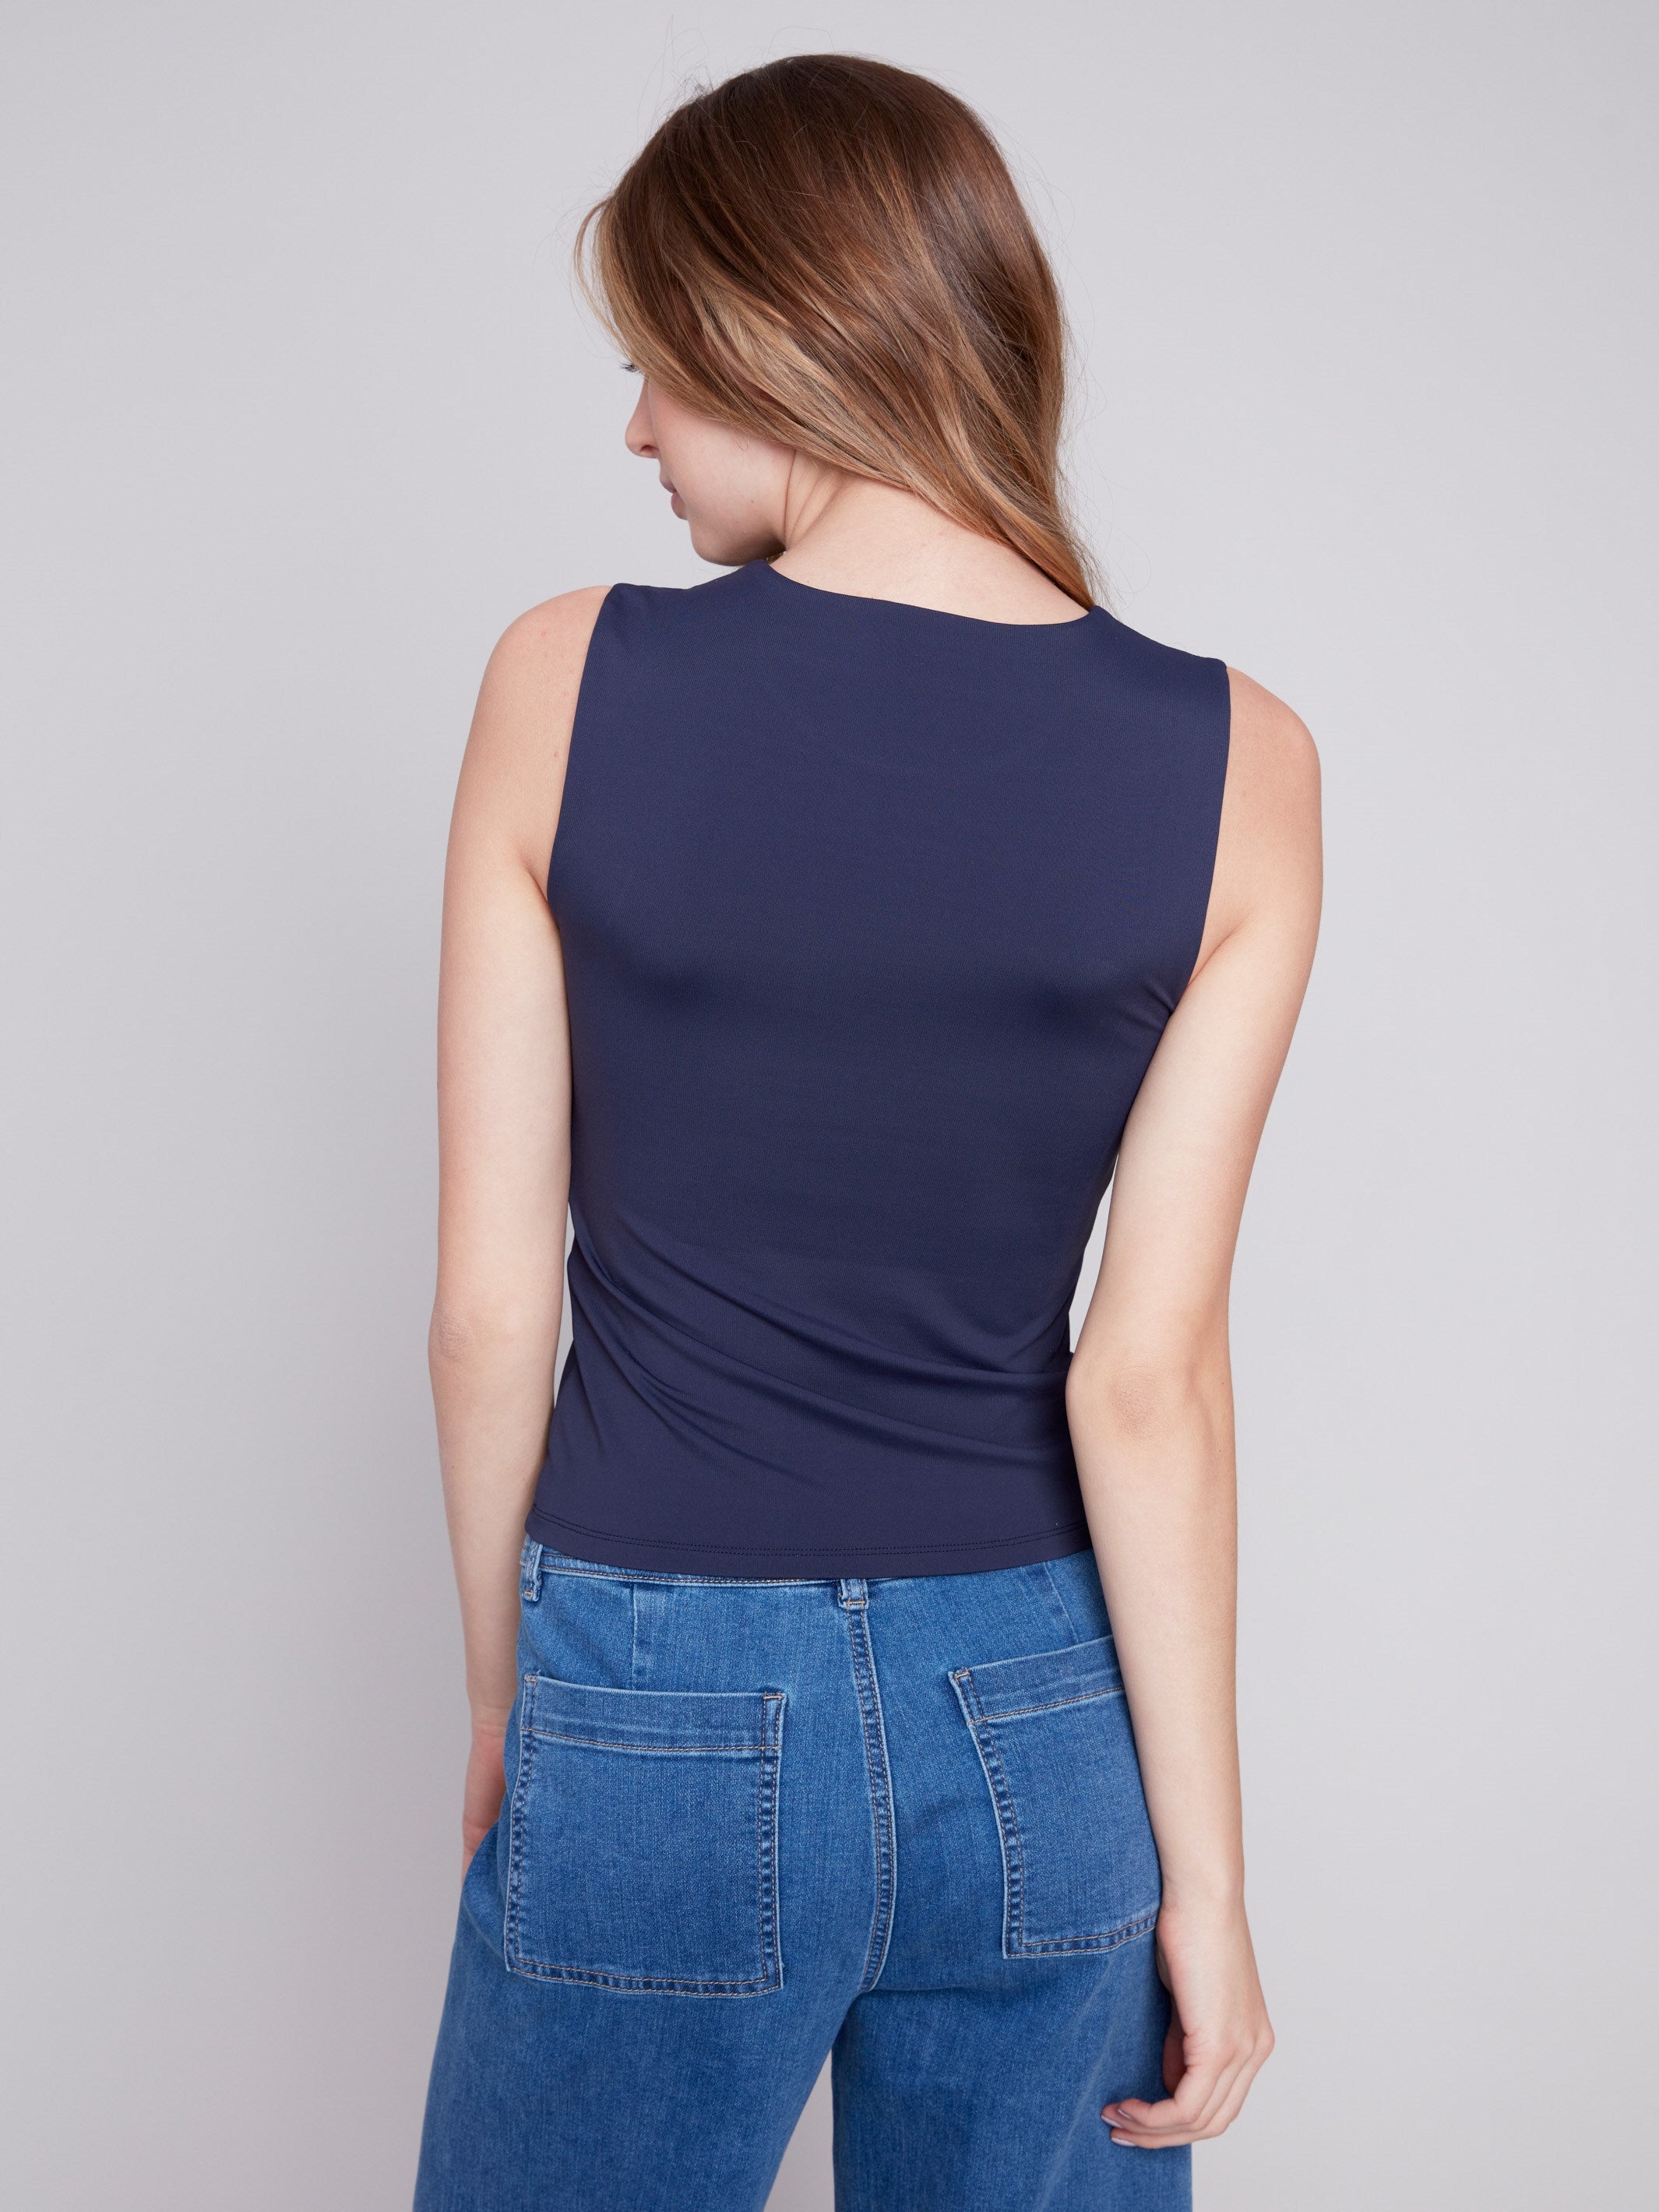 Sleeveless Super Stretch Top - Navy - Charlie B Collection Canada - Image 2